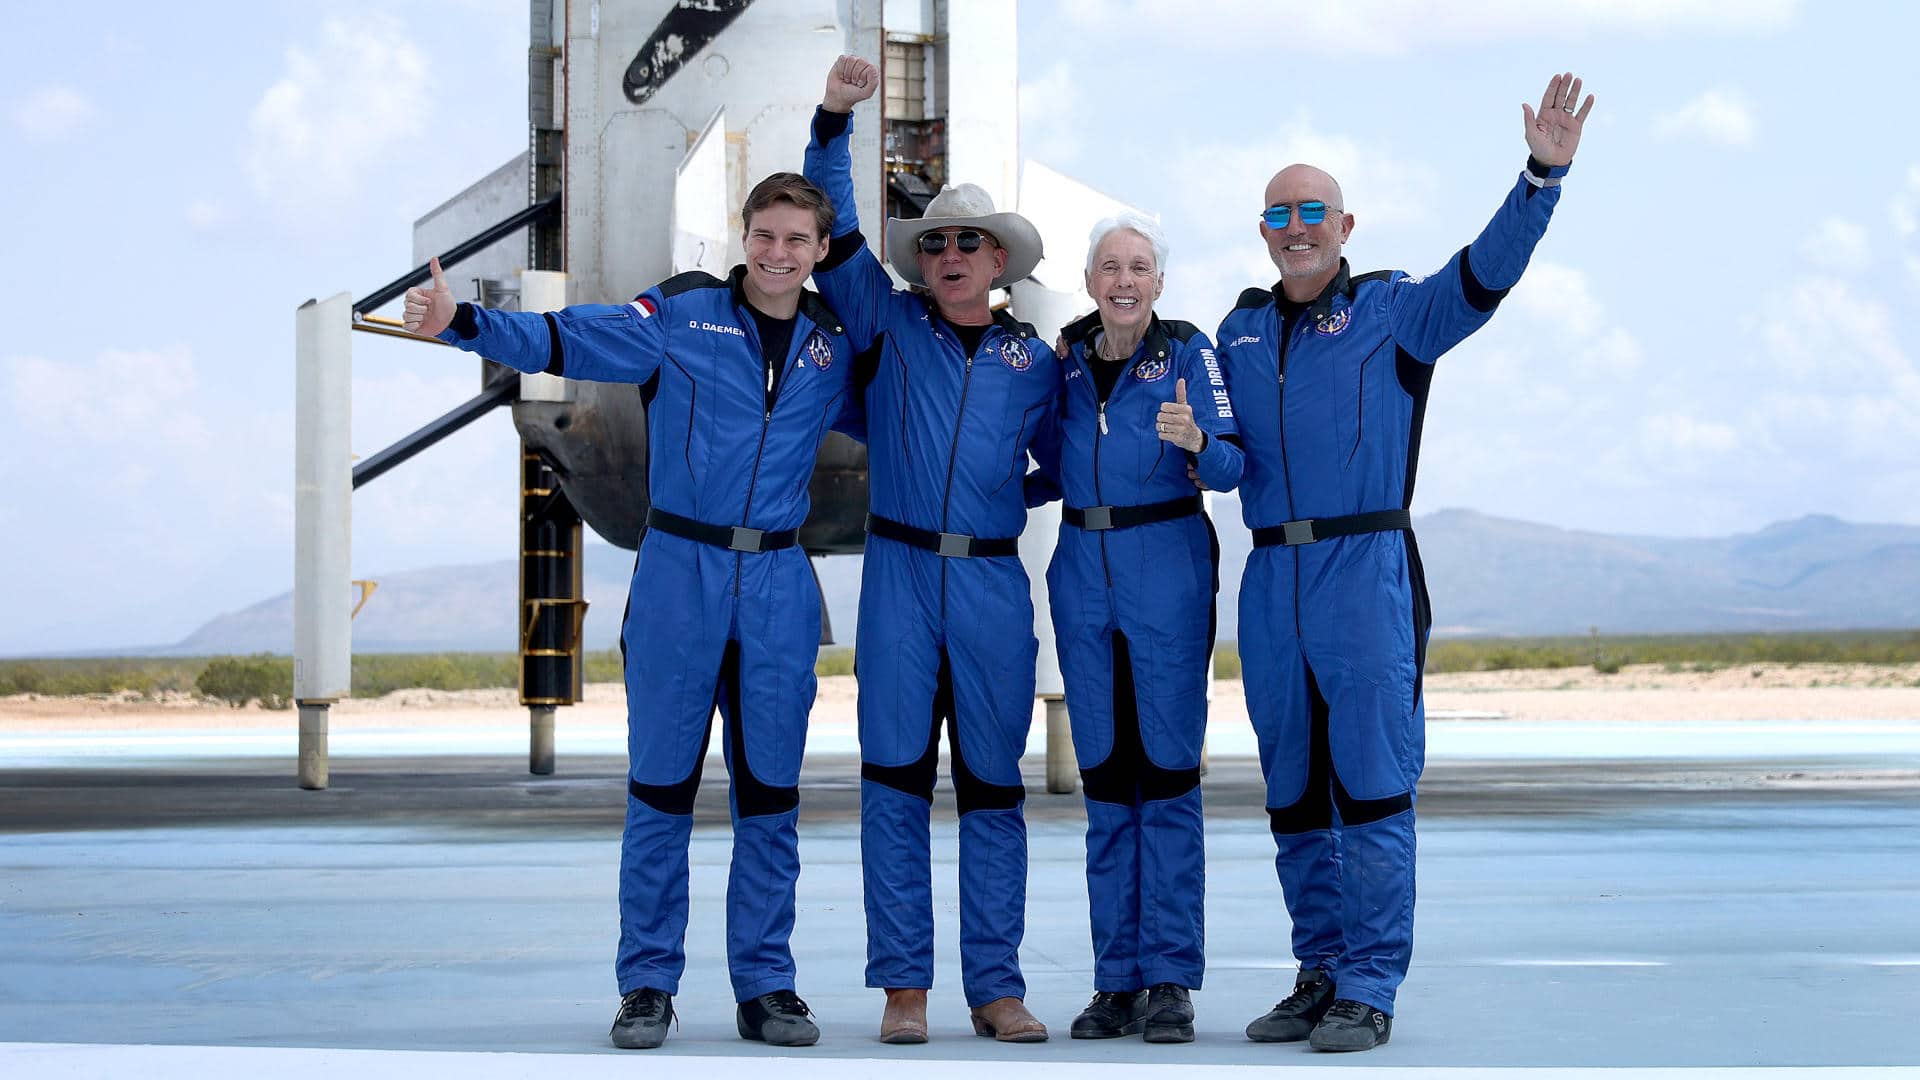 Blue Origin’s New Shepard crew (L-R) Oliver Daemen, Jeff Bezos, Wally Funk, and Mark Bezos pose for a picture after flying into space on July 20, 2021.